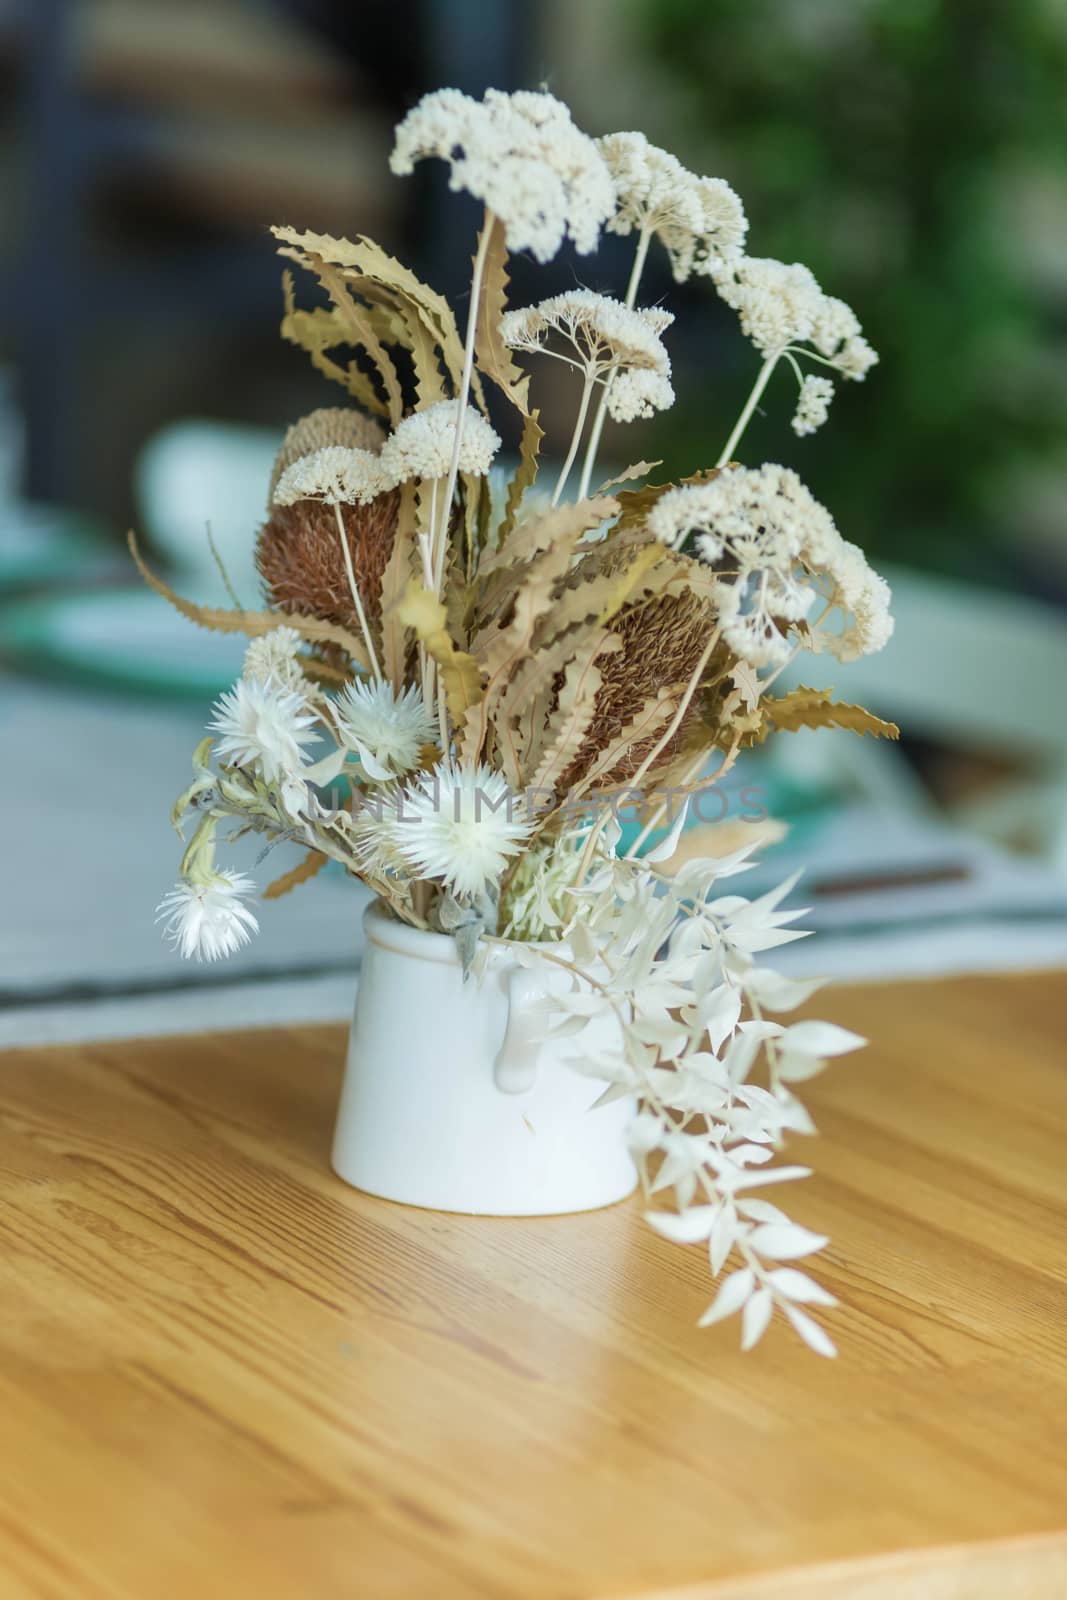 A Stylish table setting with dried flowers. by galinasharapova